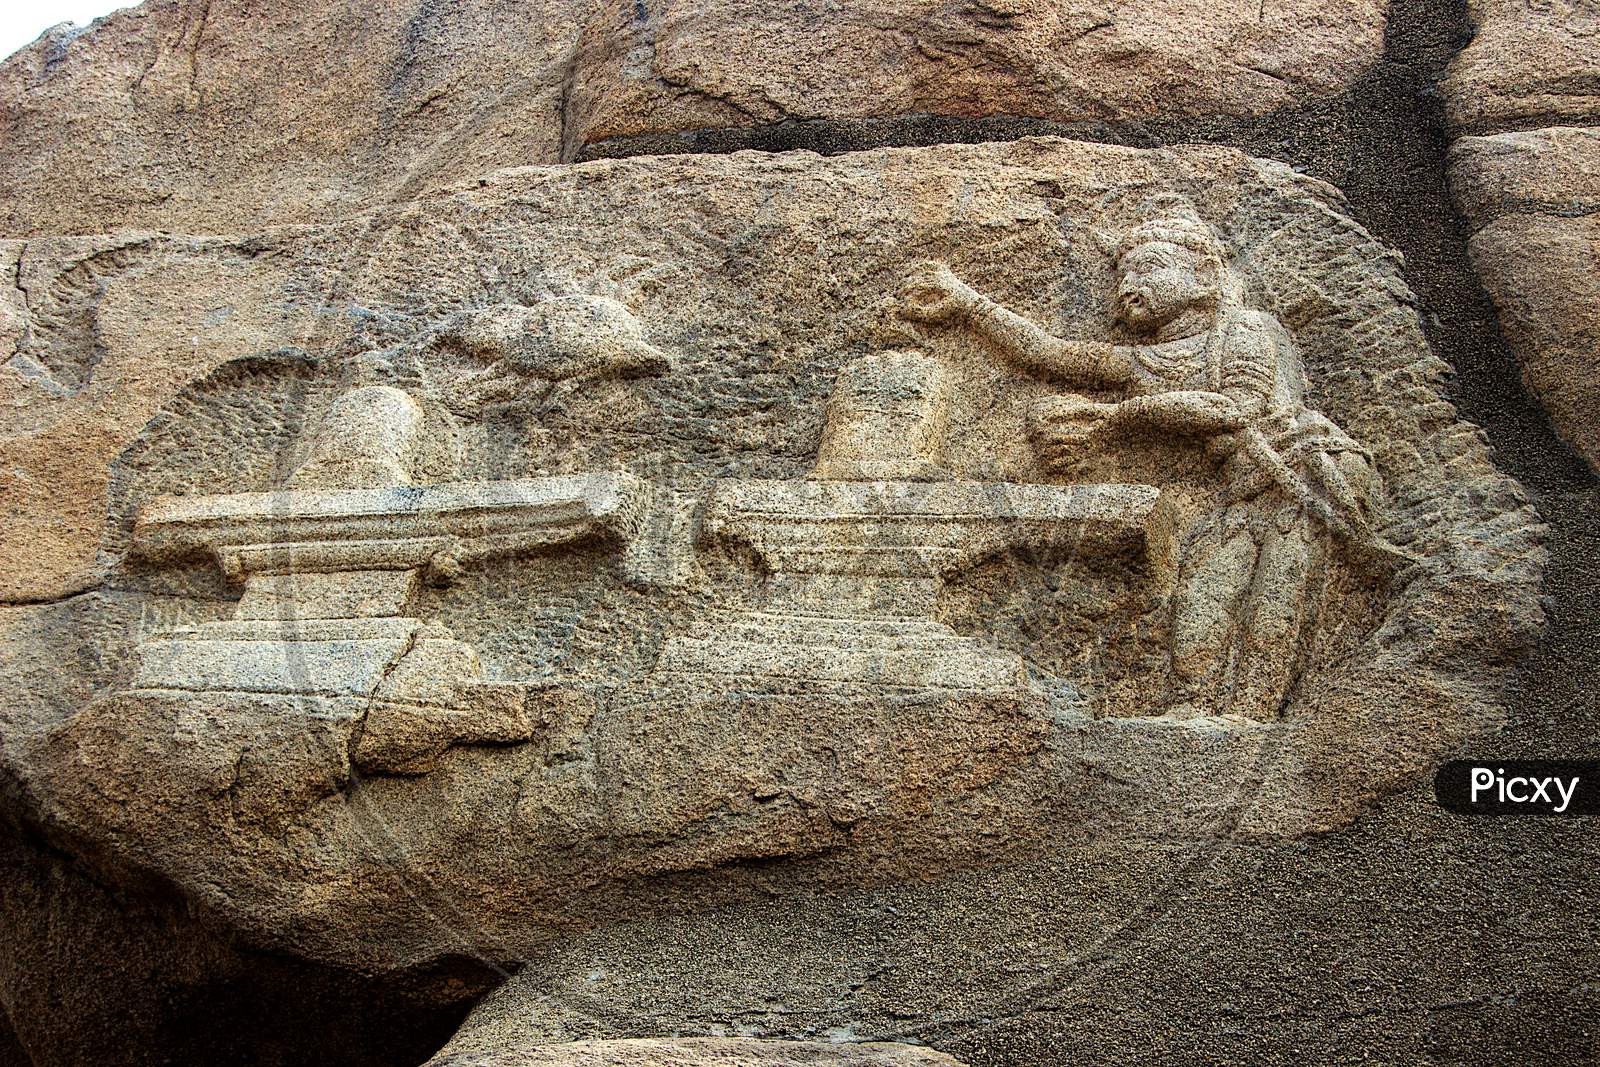 Bas Relief Carving On Rock Face